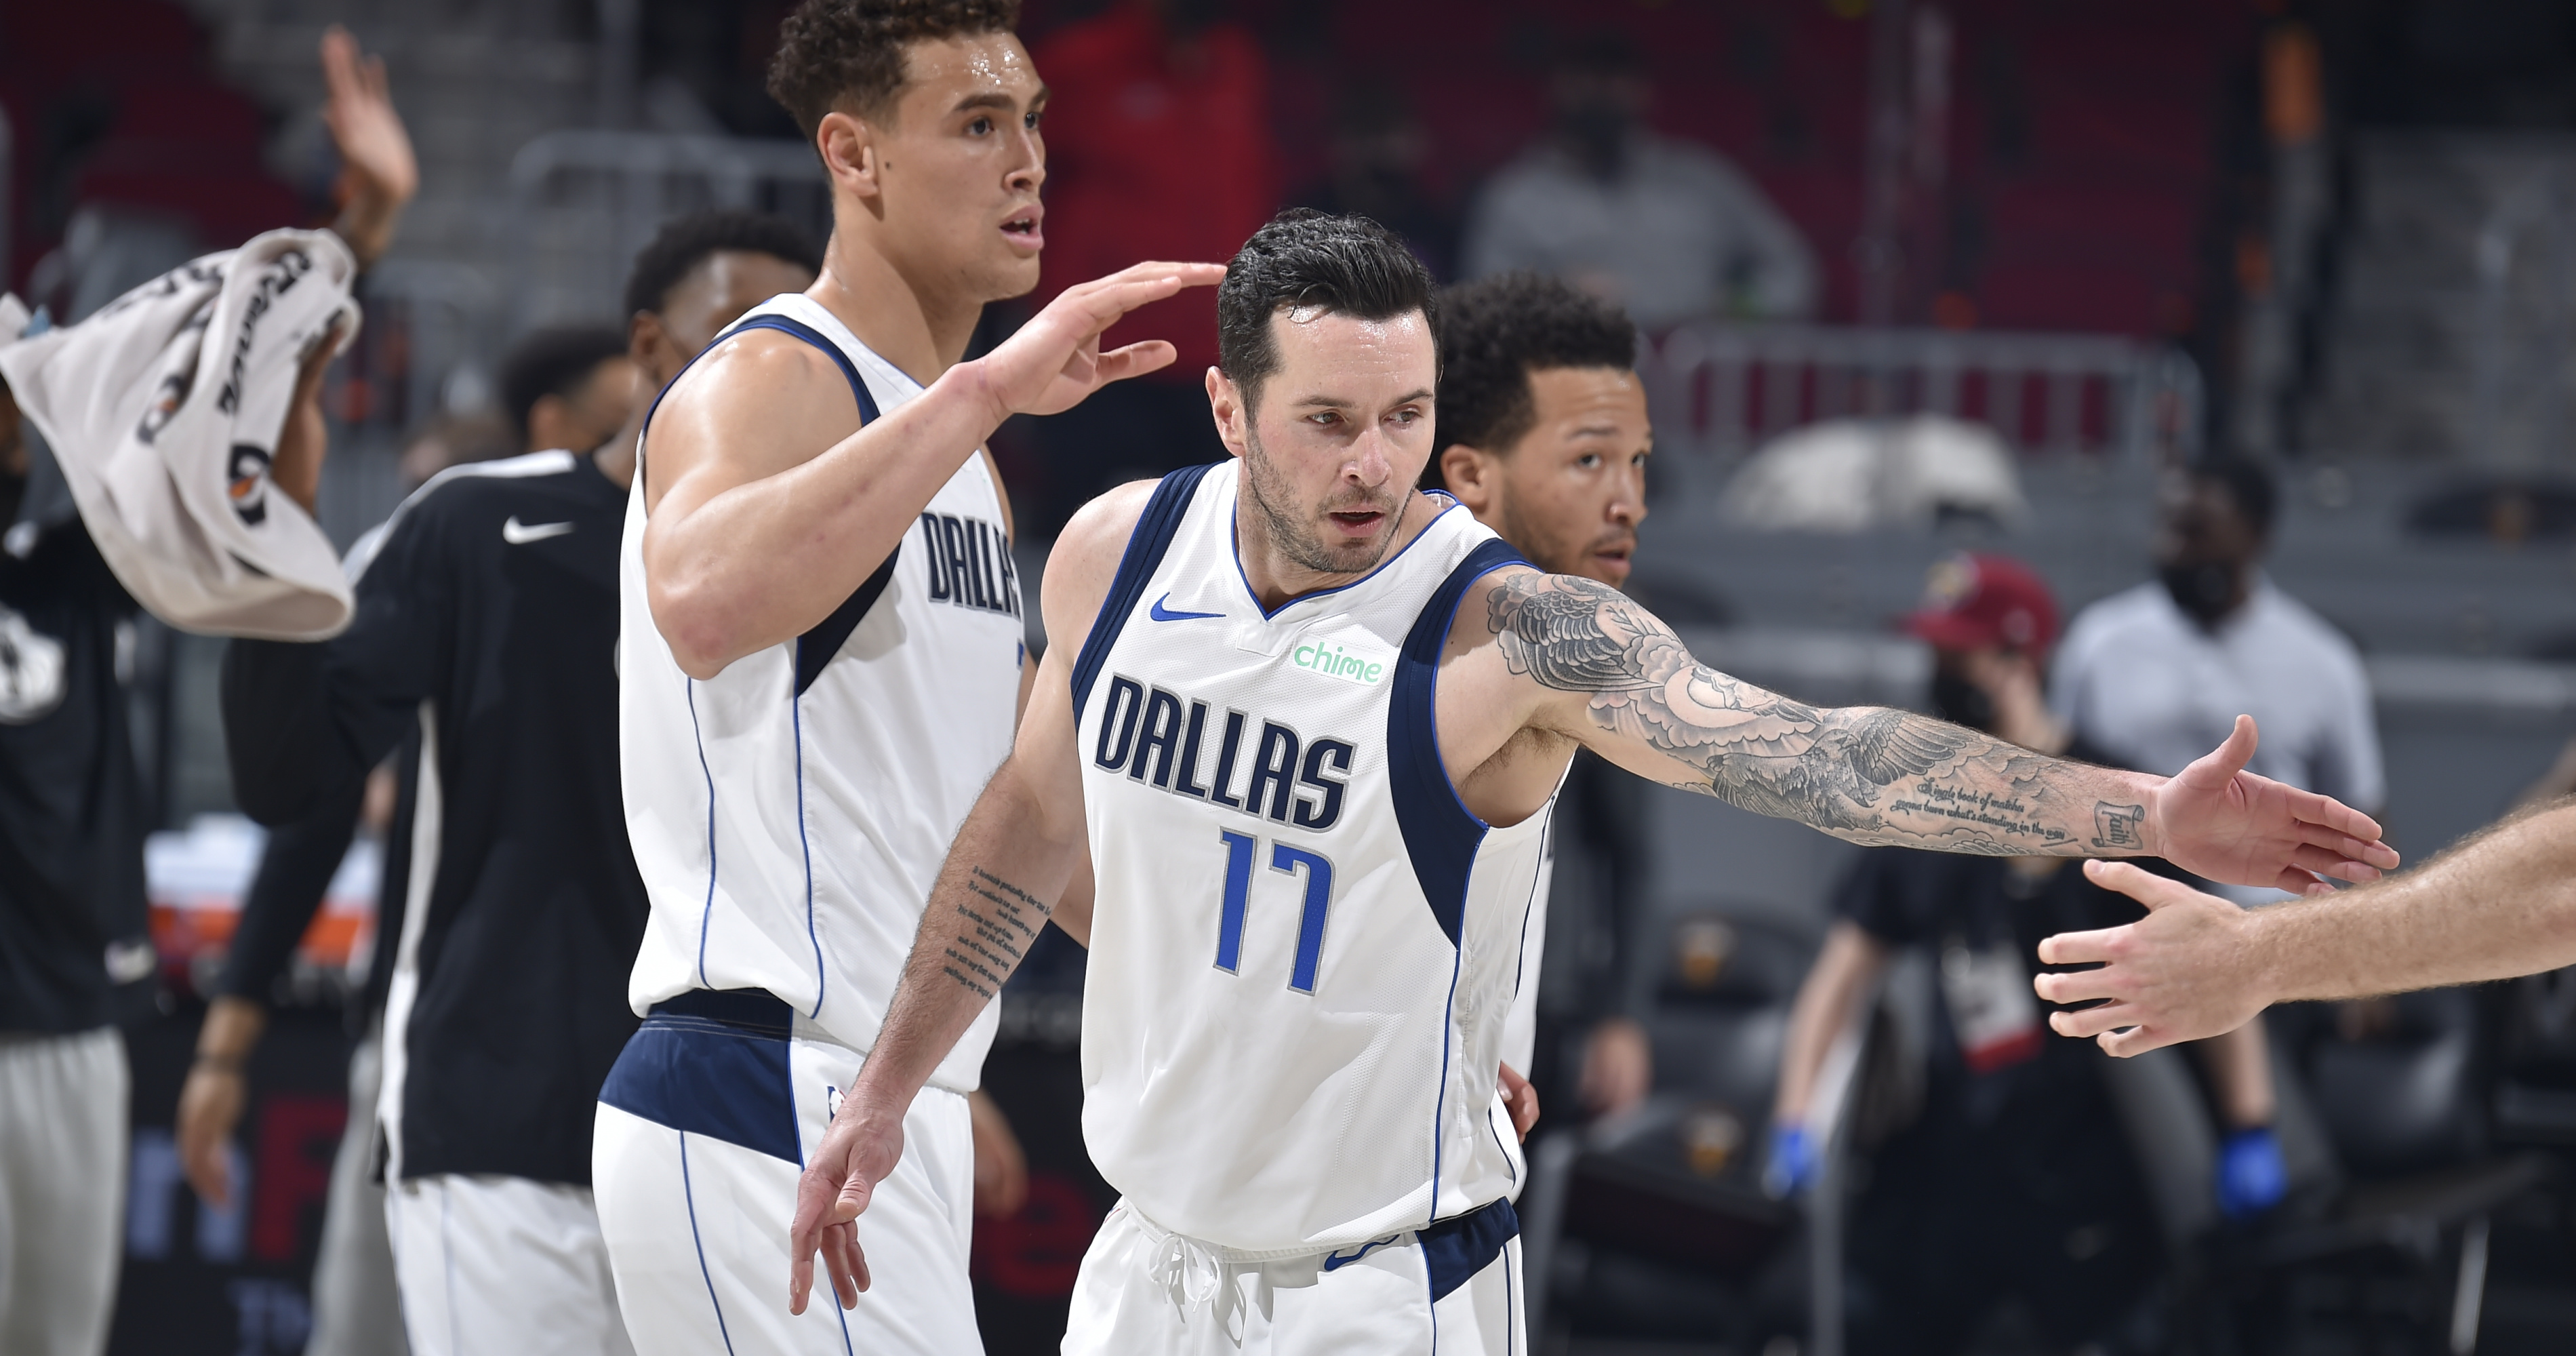 JJ Redick on X: Jalen Brunson hopped on the show this week to discuss his  💰 from the Knicks, the Mavs' playoff run, and unsung heroes in the NBA.  Great episode. Will